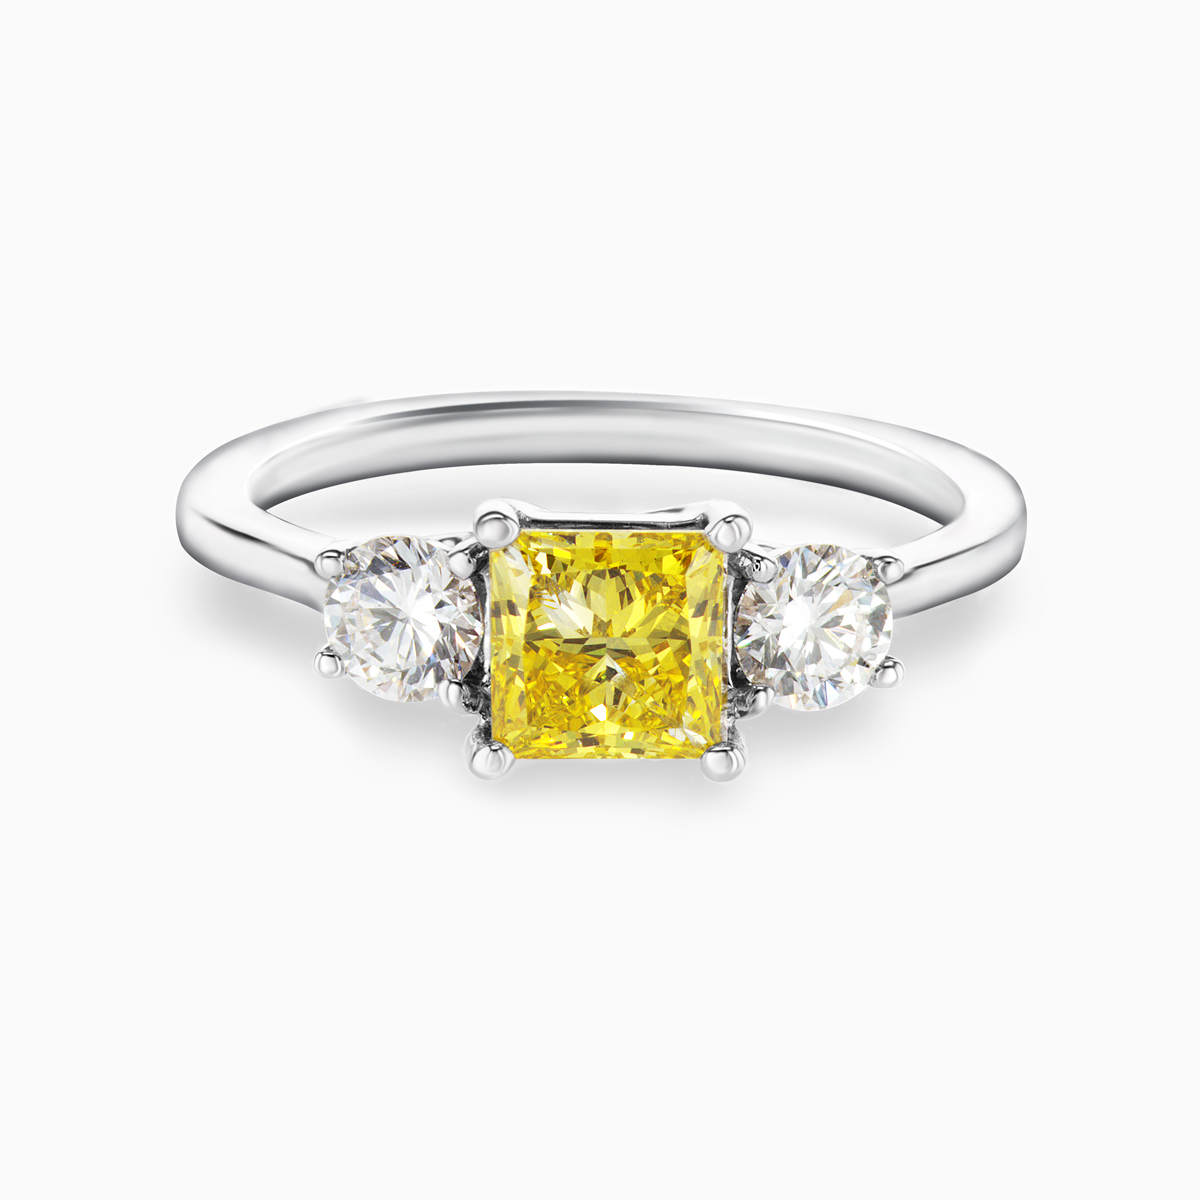 Three-stone Engagement ring with Fancy Yellow Princess-cut Lab-created Diamond